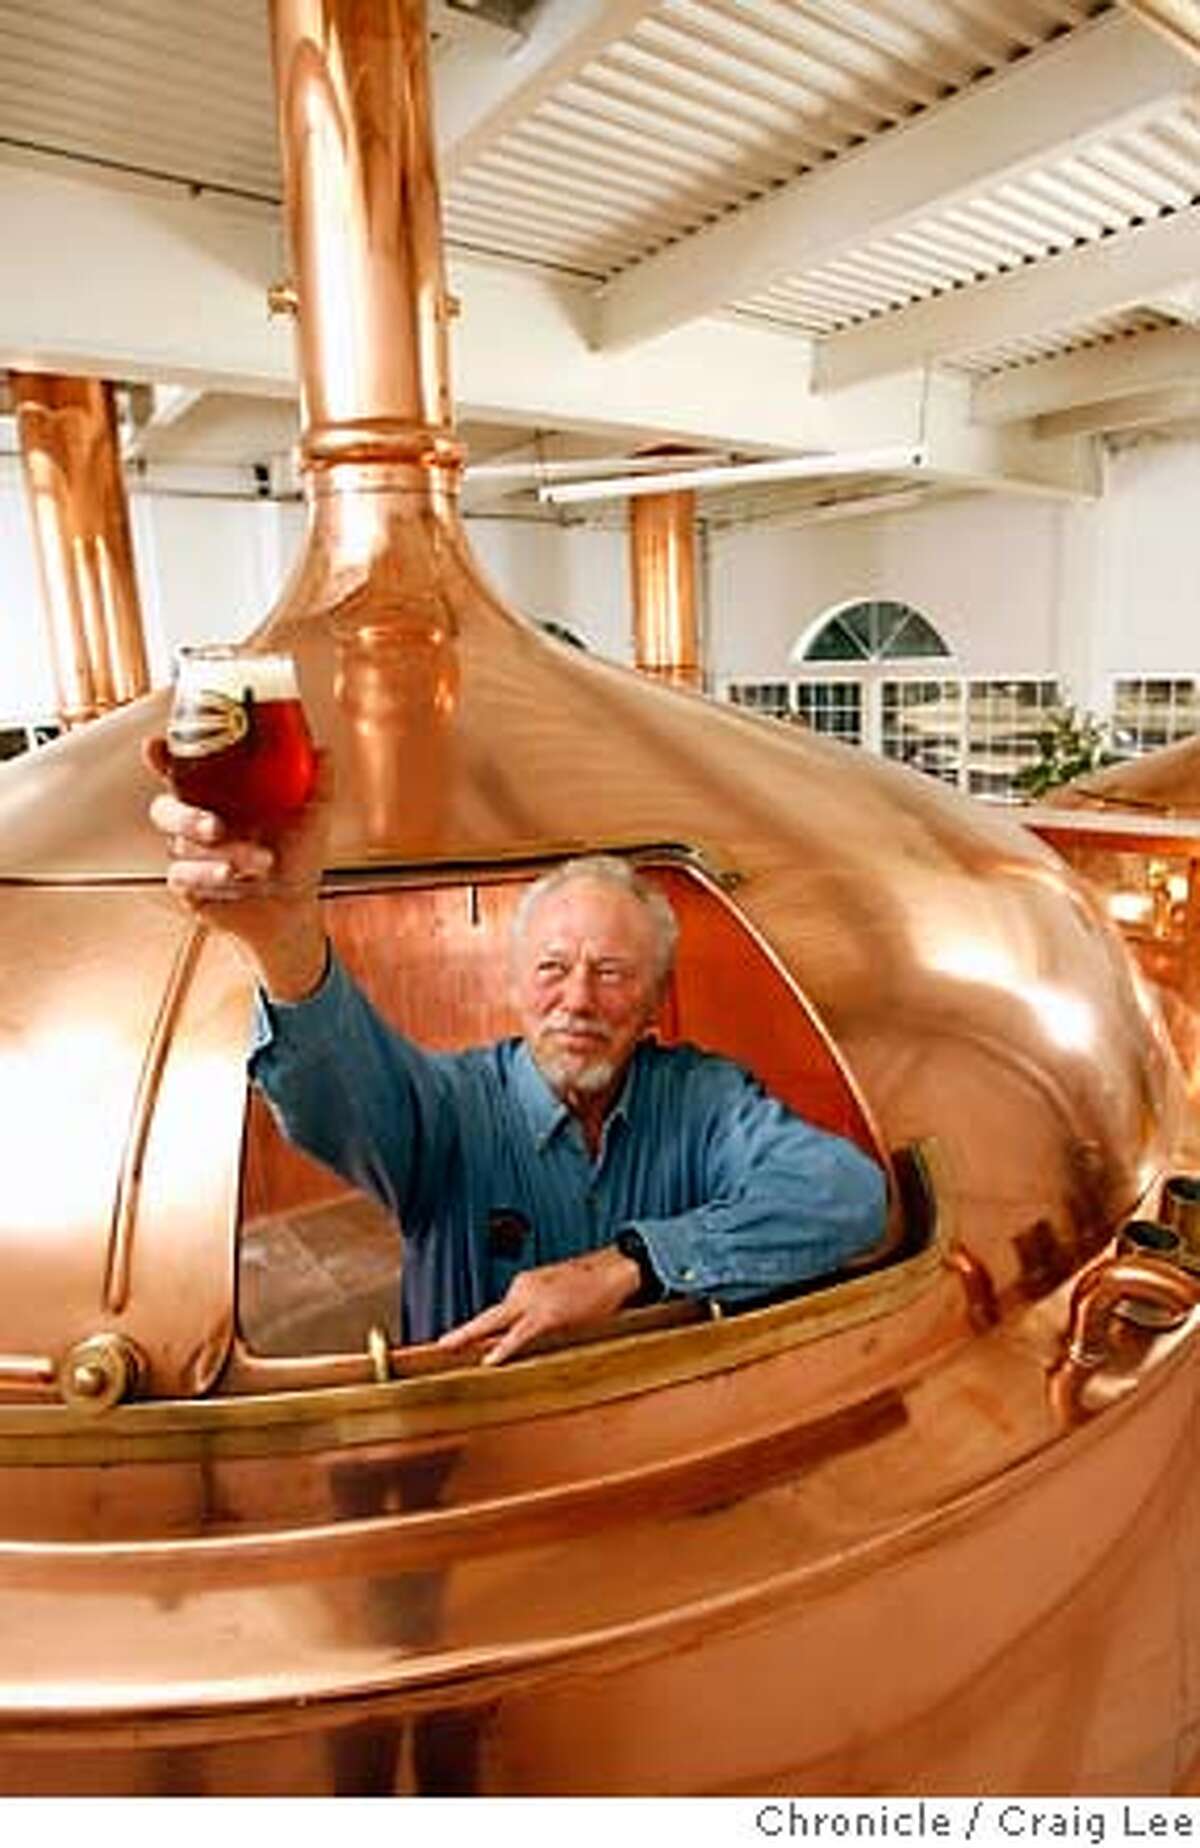 BEERTOUR29_352_cl.JPG Story about breweries in Mendocino and Sonoma counties. This is Ken Allen of Anderson Brewing Company in Boonville. He is inside one of his copper boiling kettles. Craig Lee / The Chronicle MANDATORY CREDIT FOR PHOTOG AND SF CHRONICLE/ -MAGS OUT